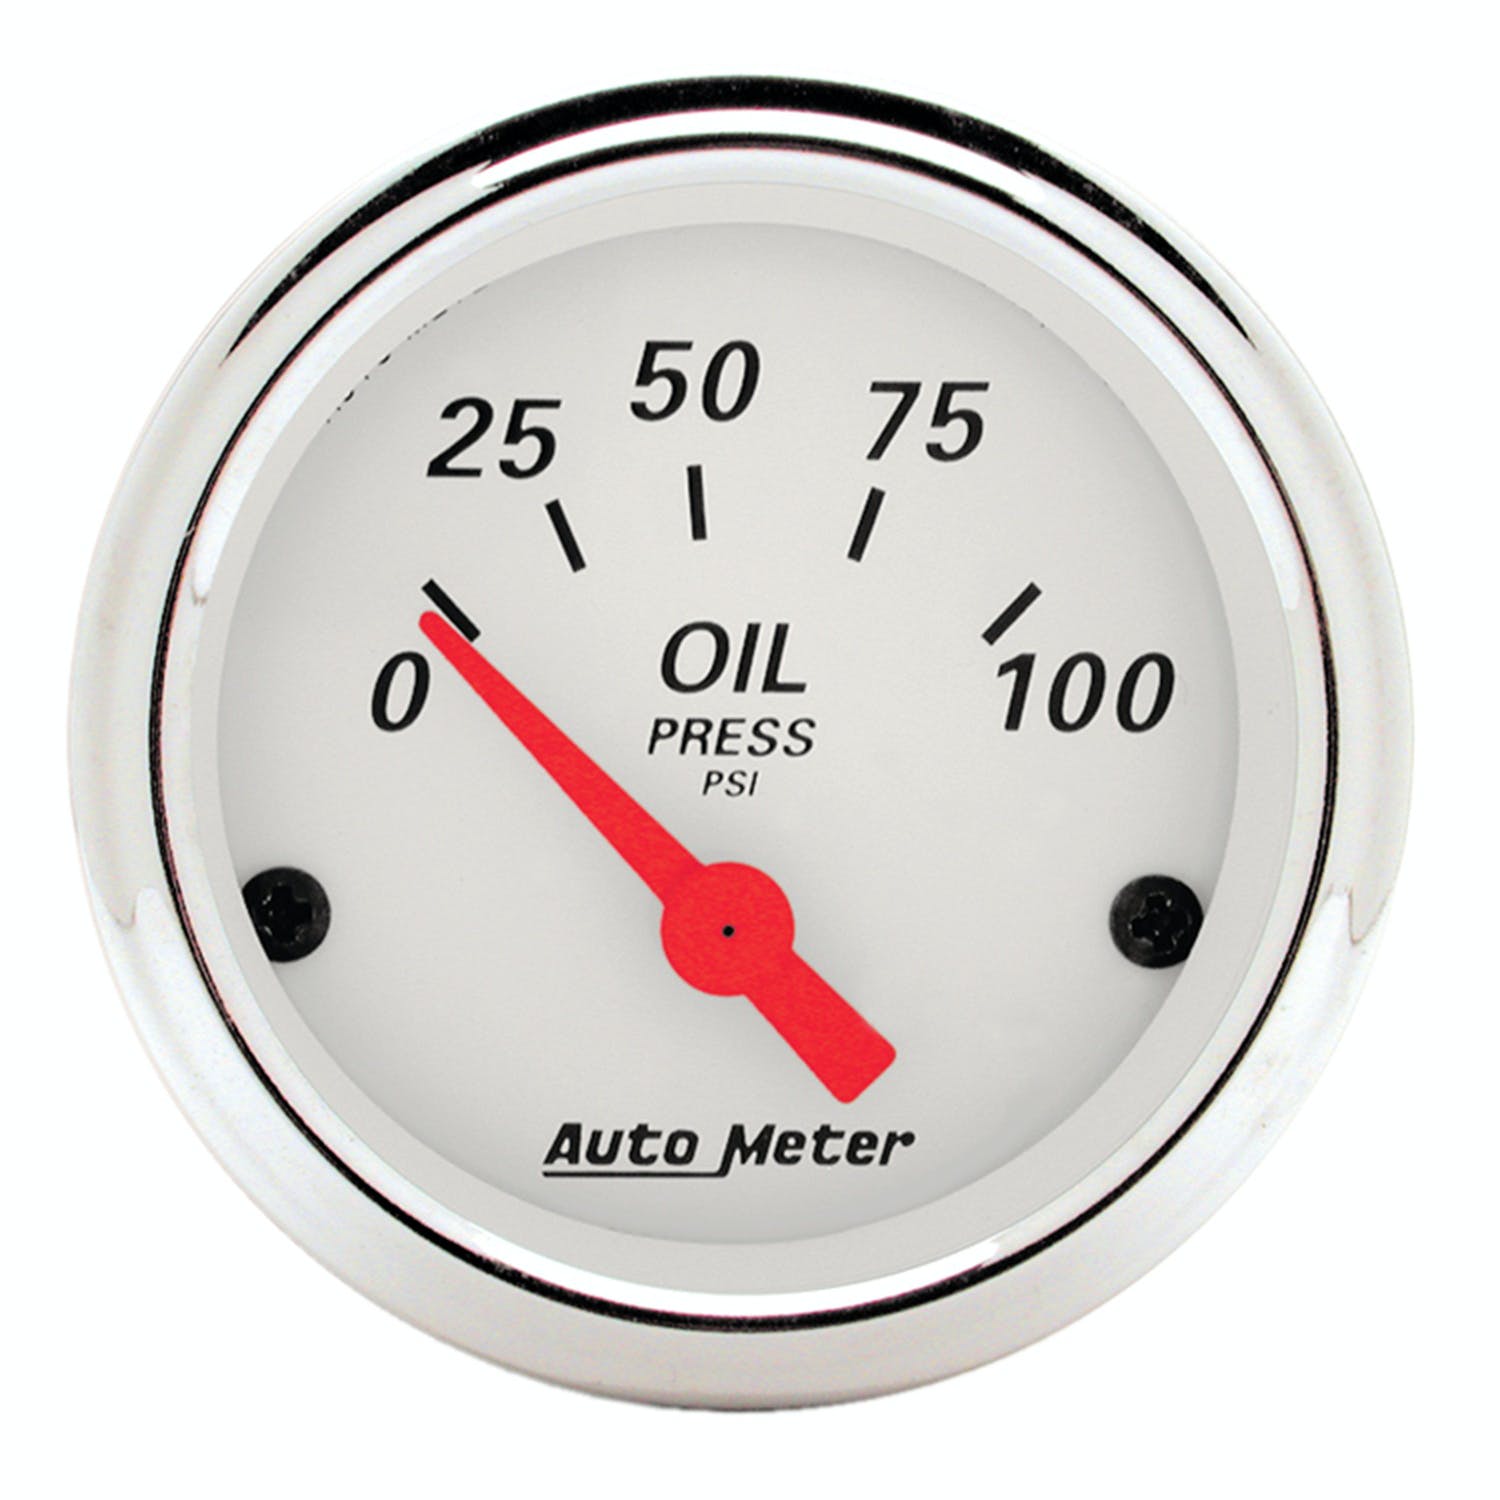 AutoMeter Products 1327 Arctic White Series Oil Pressure Gauge 0-100 PSI, 2-1/16 inch